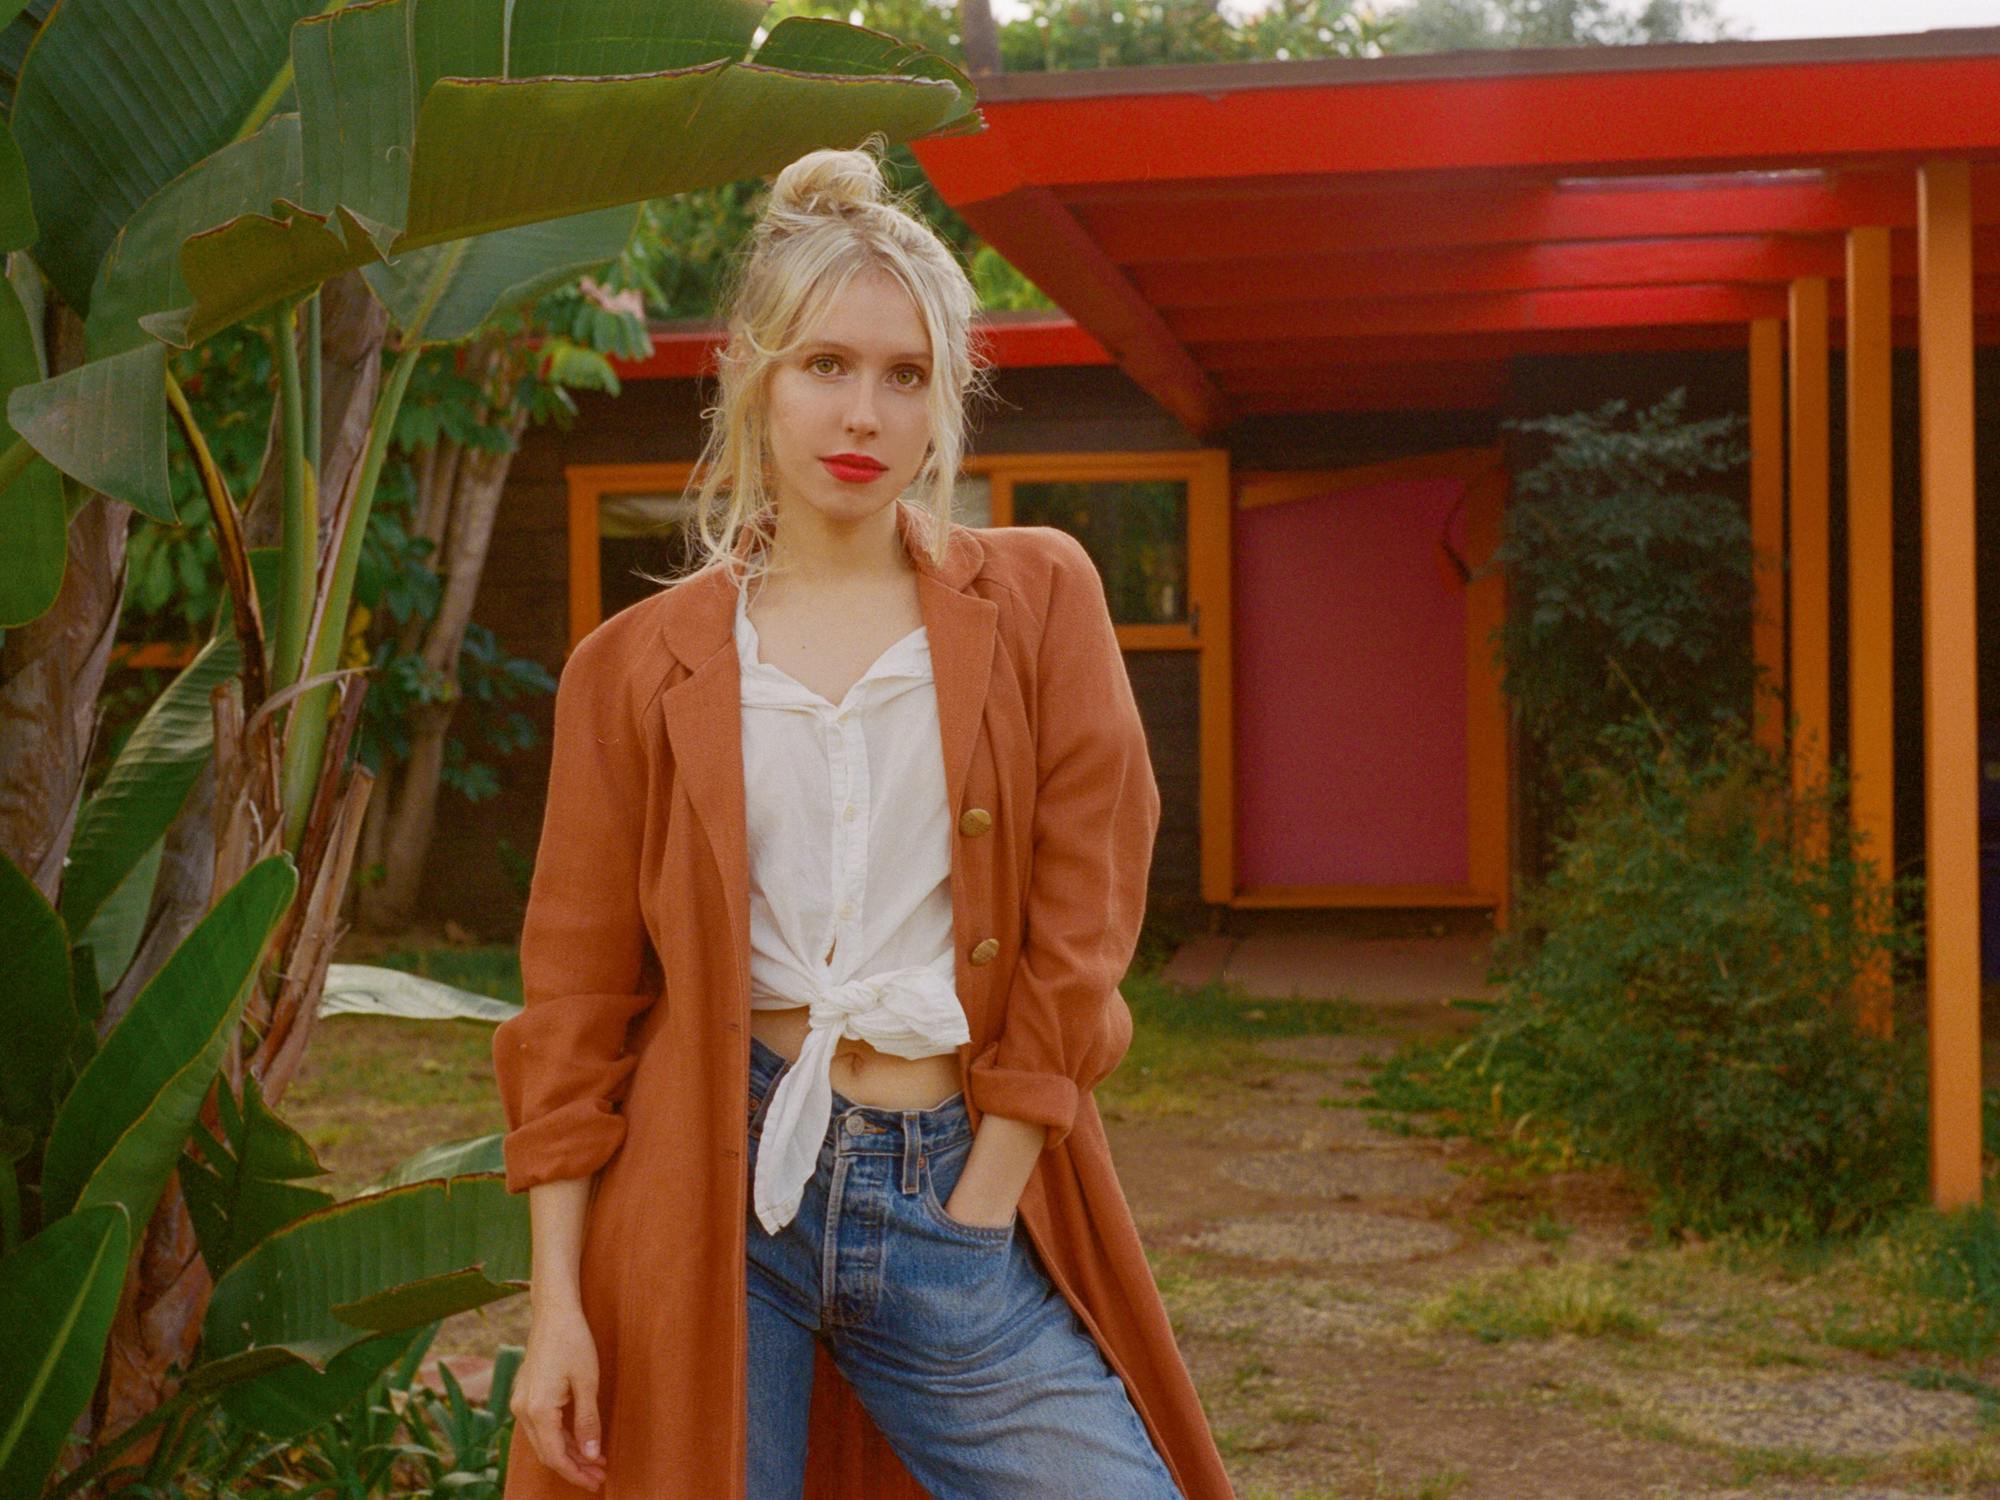 A blonde woman poses with one hand in her pocket. Around her are palms and other greenery, with a single story red building behind her enmeshed in vegetation